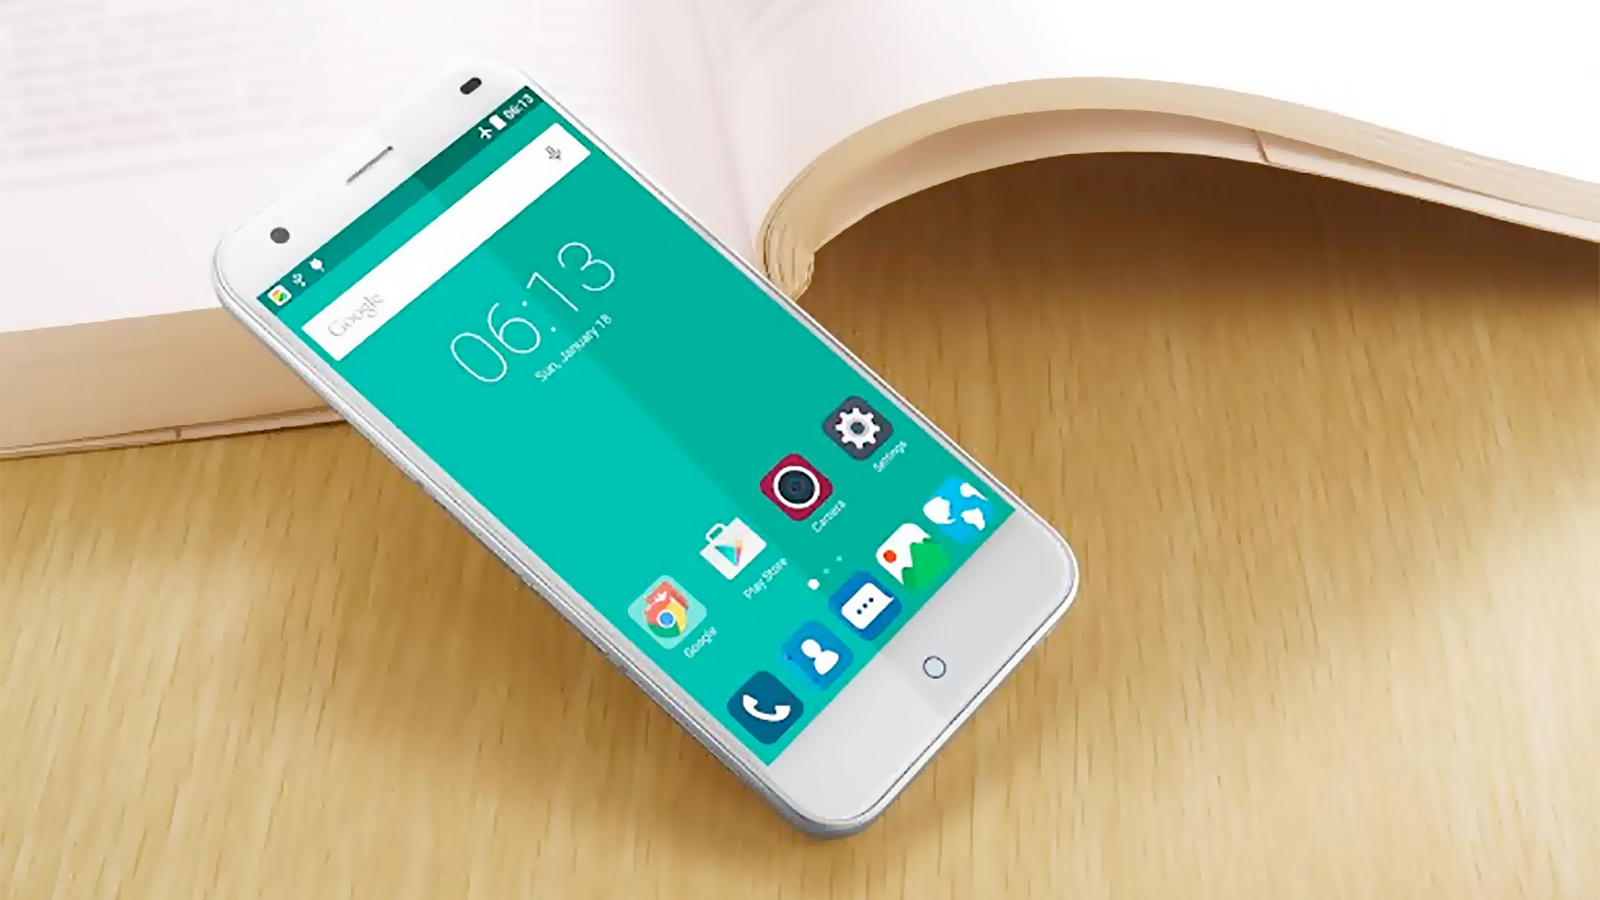 Zte Blade S6 Android Phone Offers 64 Bit Smarts At - Zte Phones Android Price - HD Wallpaper 